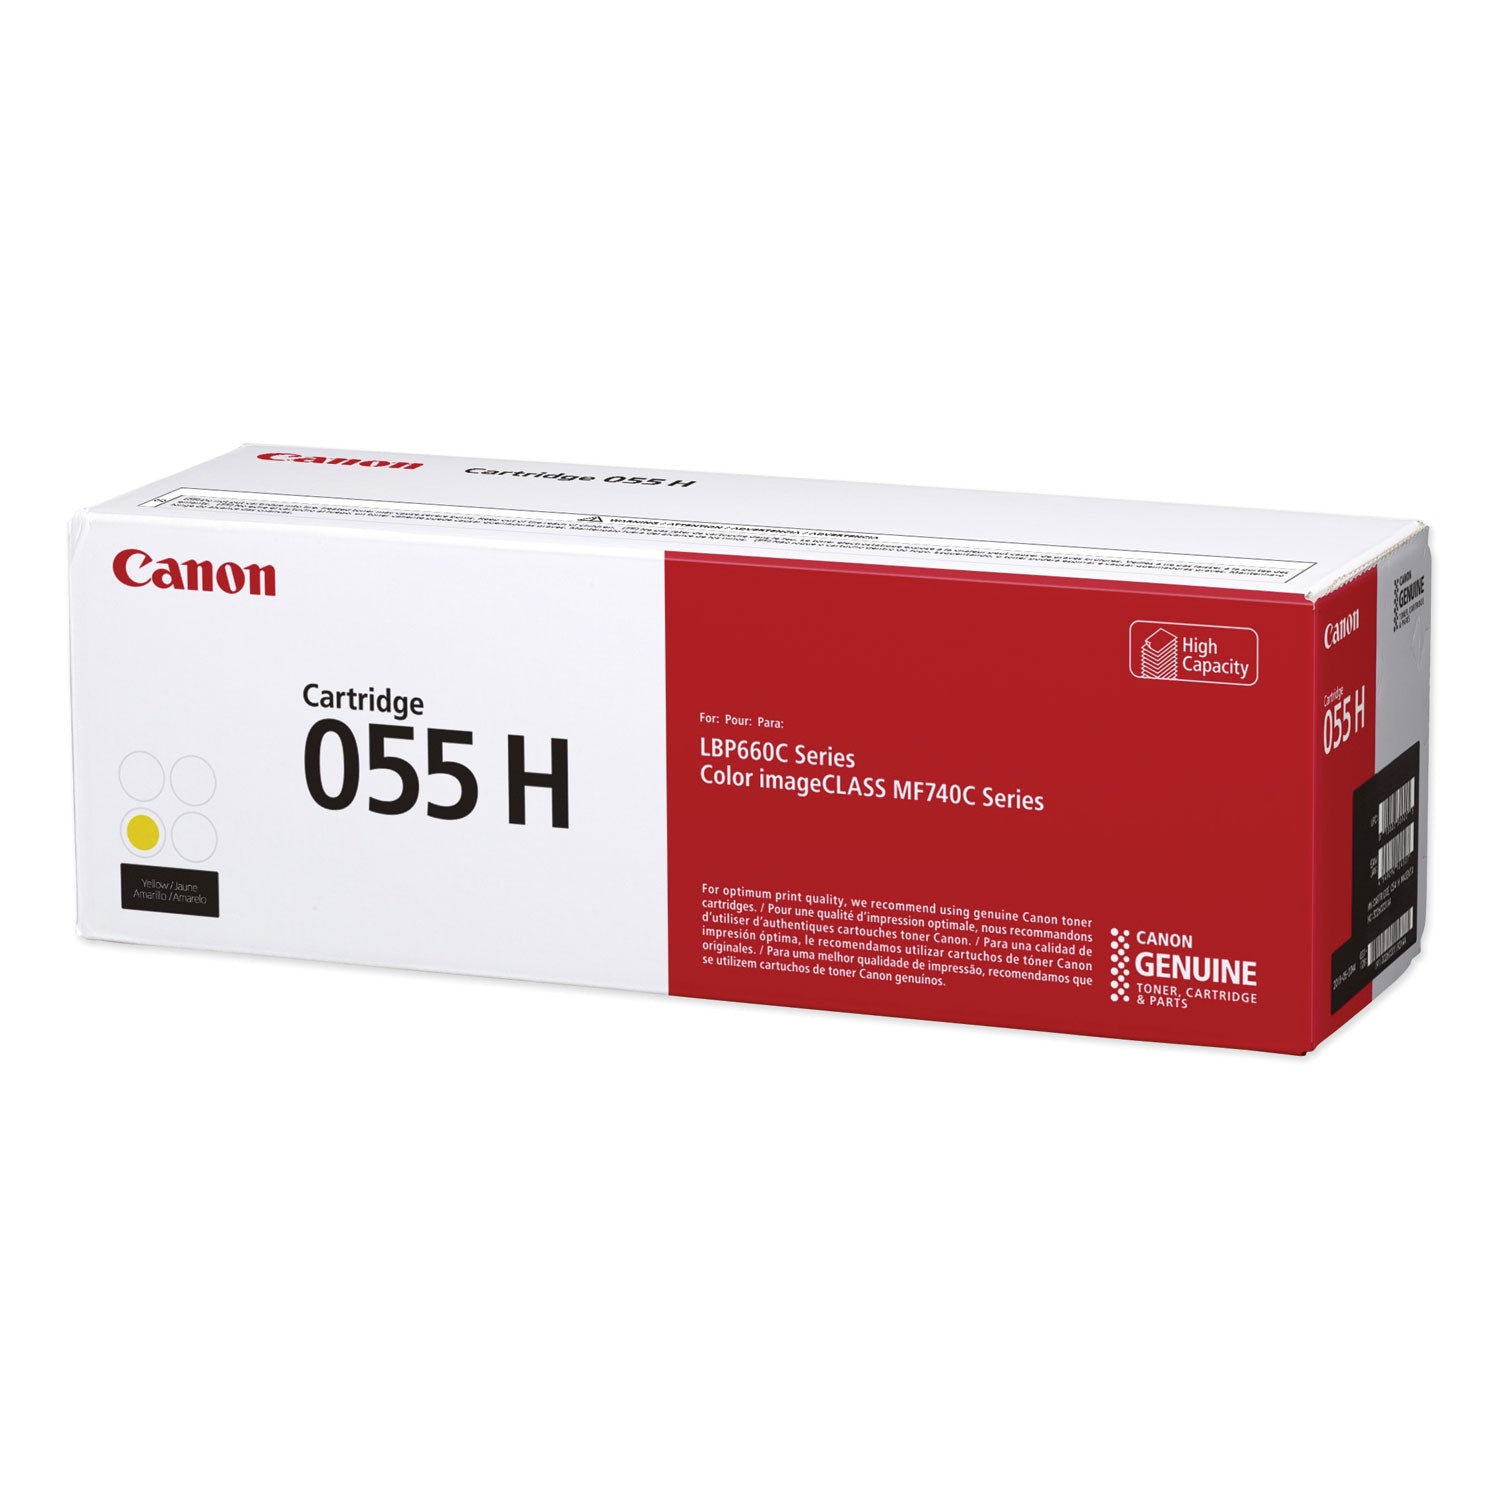 3017c001-055h-high-yield-toner-5900-page-yield-yellow_cnm3017c001 - 1